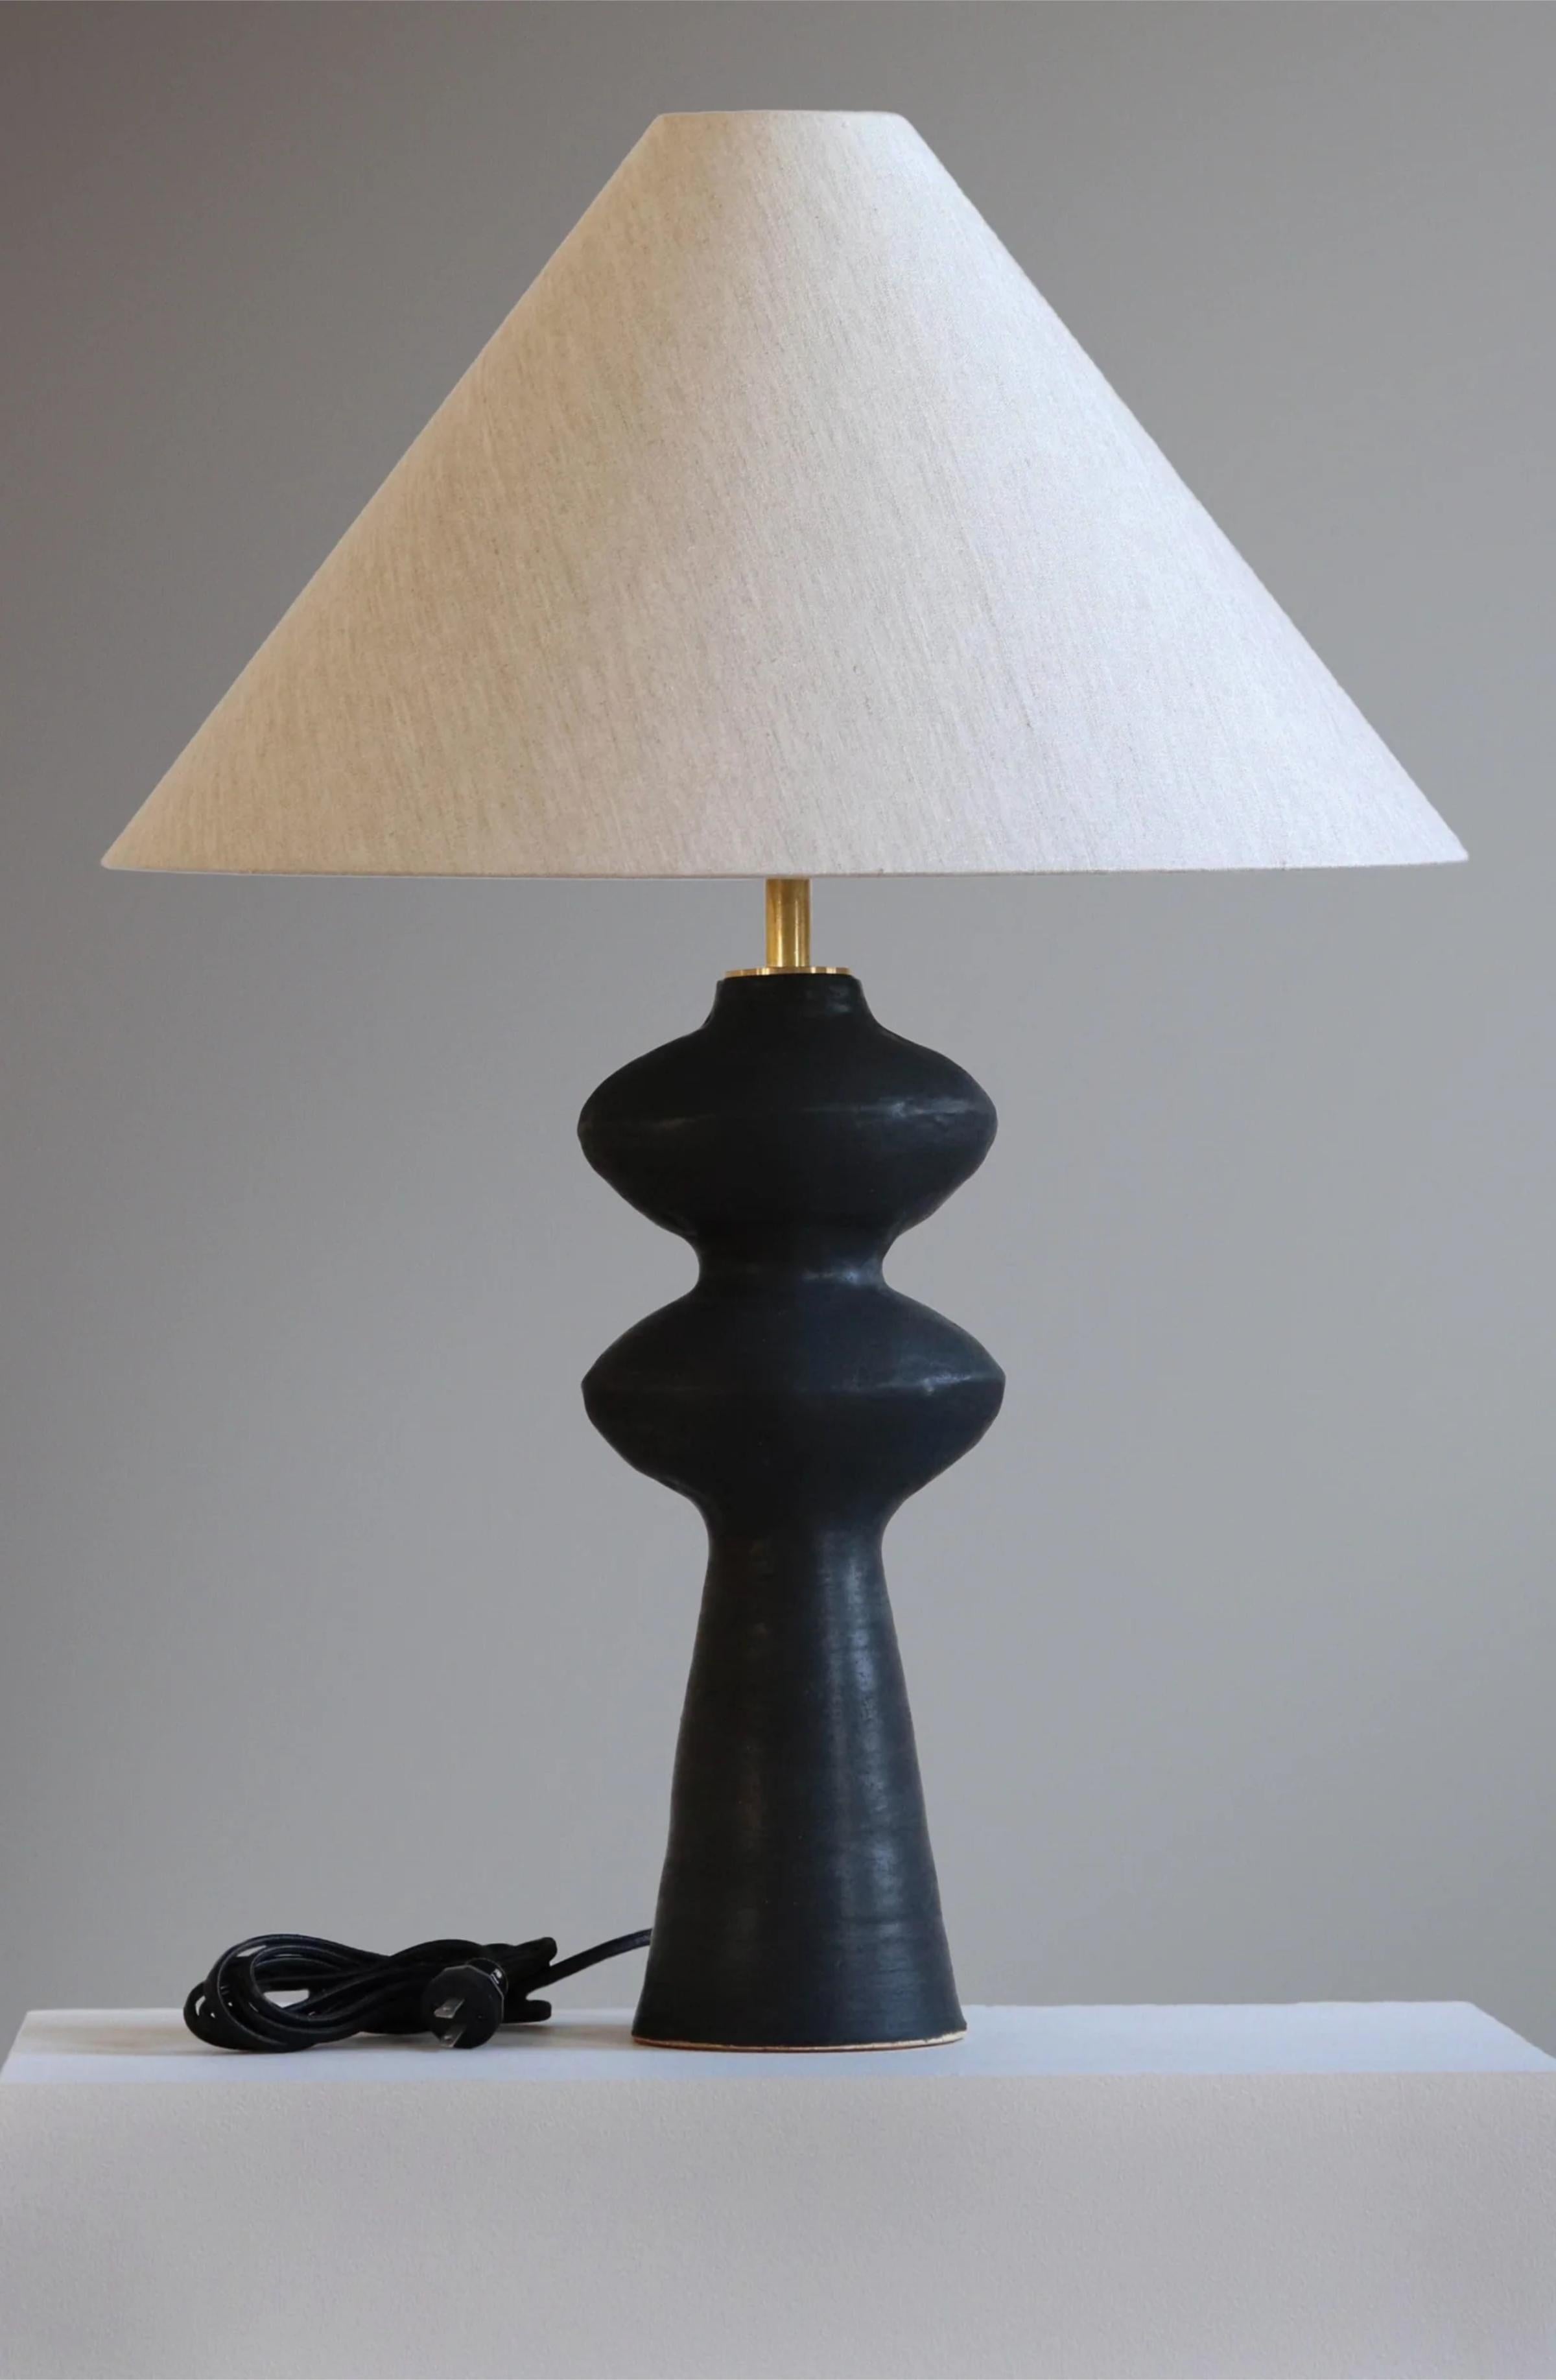 Anthracite Pollux 32 Table Lamp by  Danny Kaplan Studio
Dimensions: ⌀ 56 x H 82 cm
Materials: Glazed Ceramic, Unfinished Brass, Wax Paper

This item is handmade, and may exhibit variability within the same piece. We do our best to maintain a